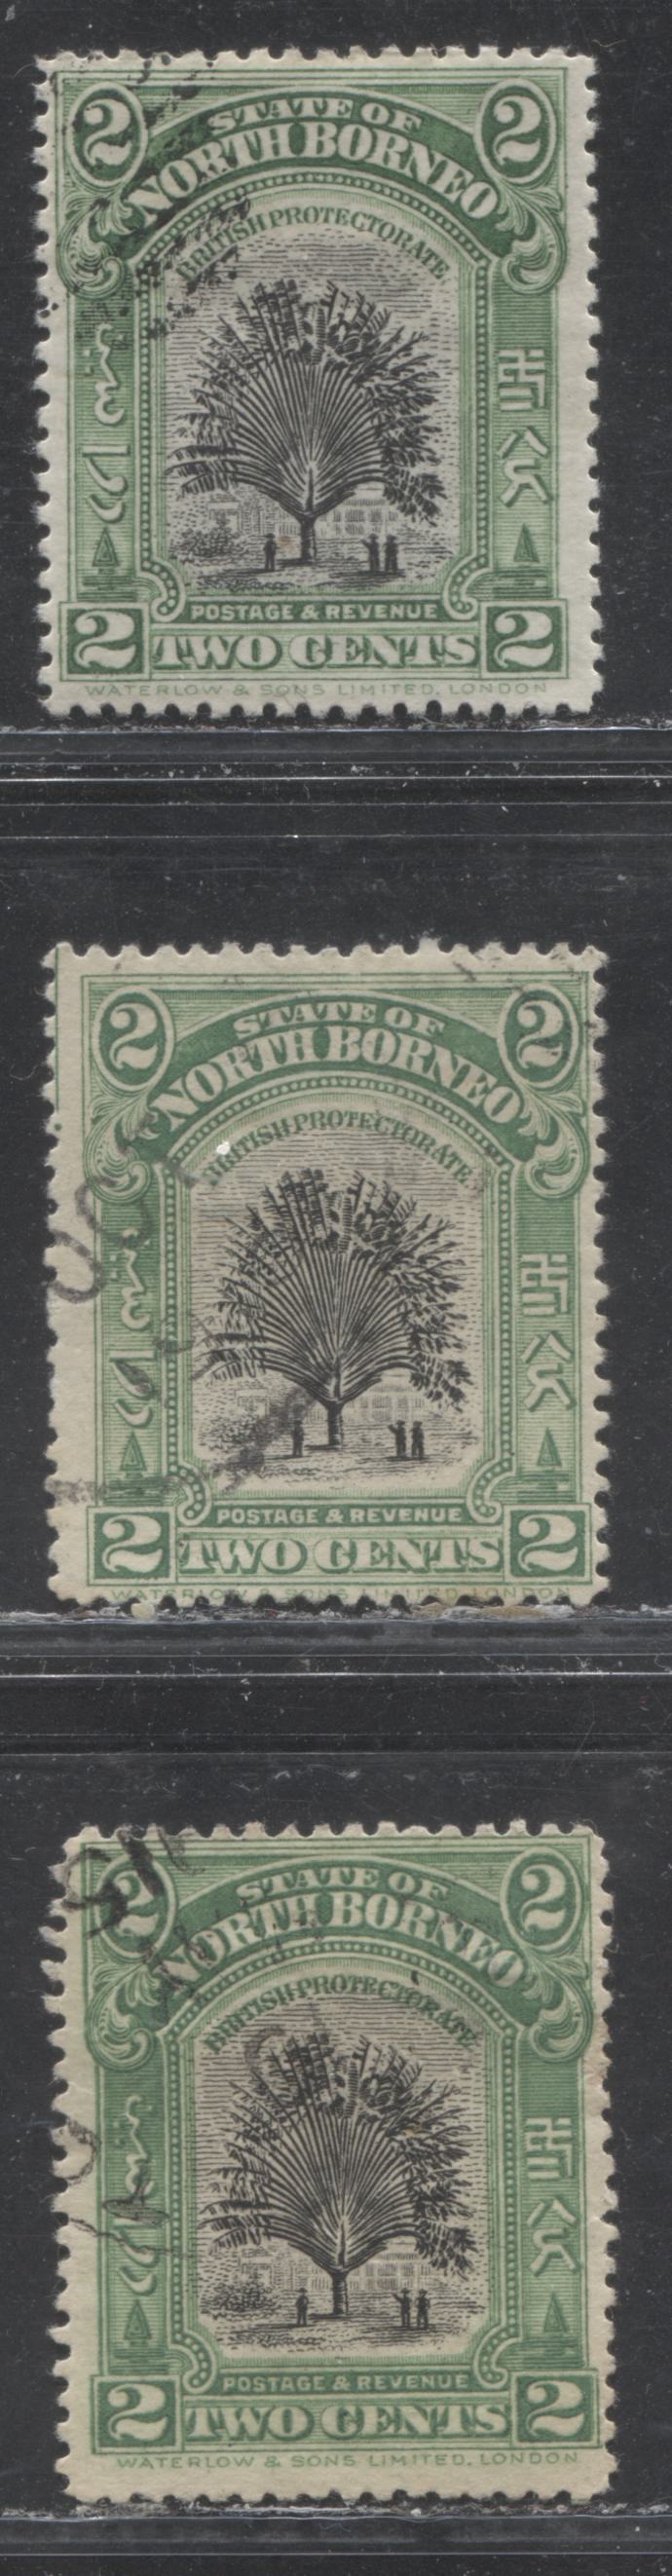 Lot 191 North Borneo SG#160 2c Black and Green Travellers' Tree, 1909-1923 Pictorial Definitive Issue, 3 Fine Used Singles, All With Visible Re-Entries